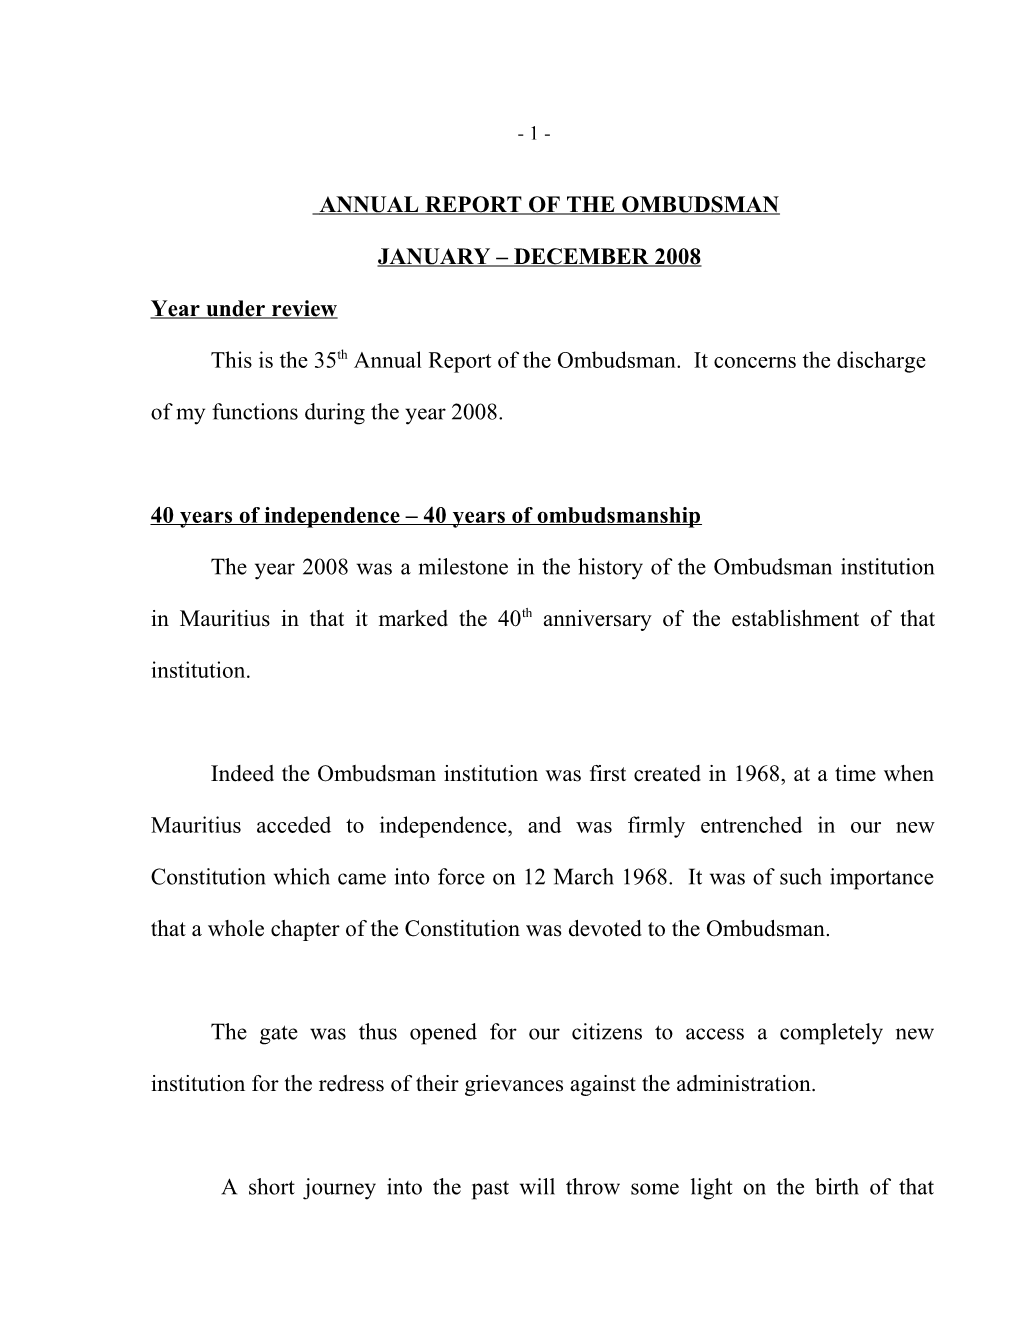 Annual Report of the Ombudsman